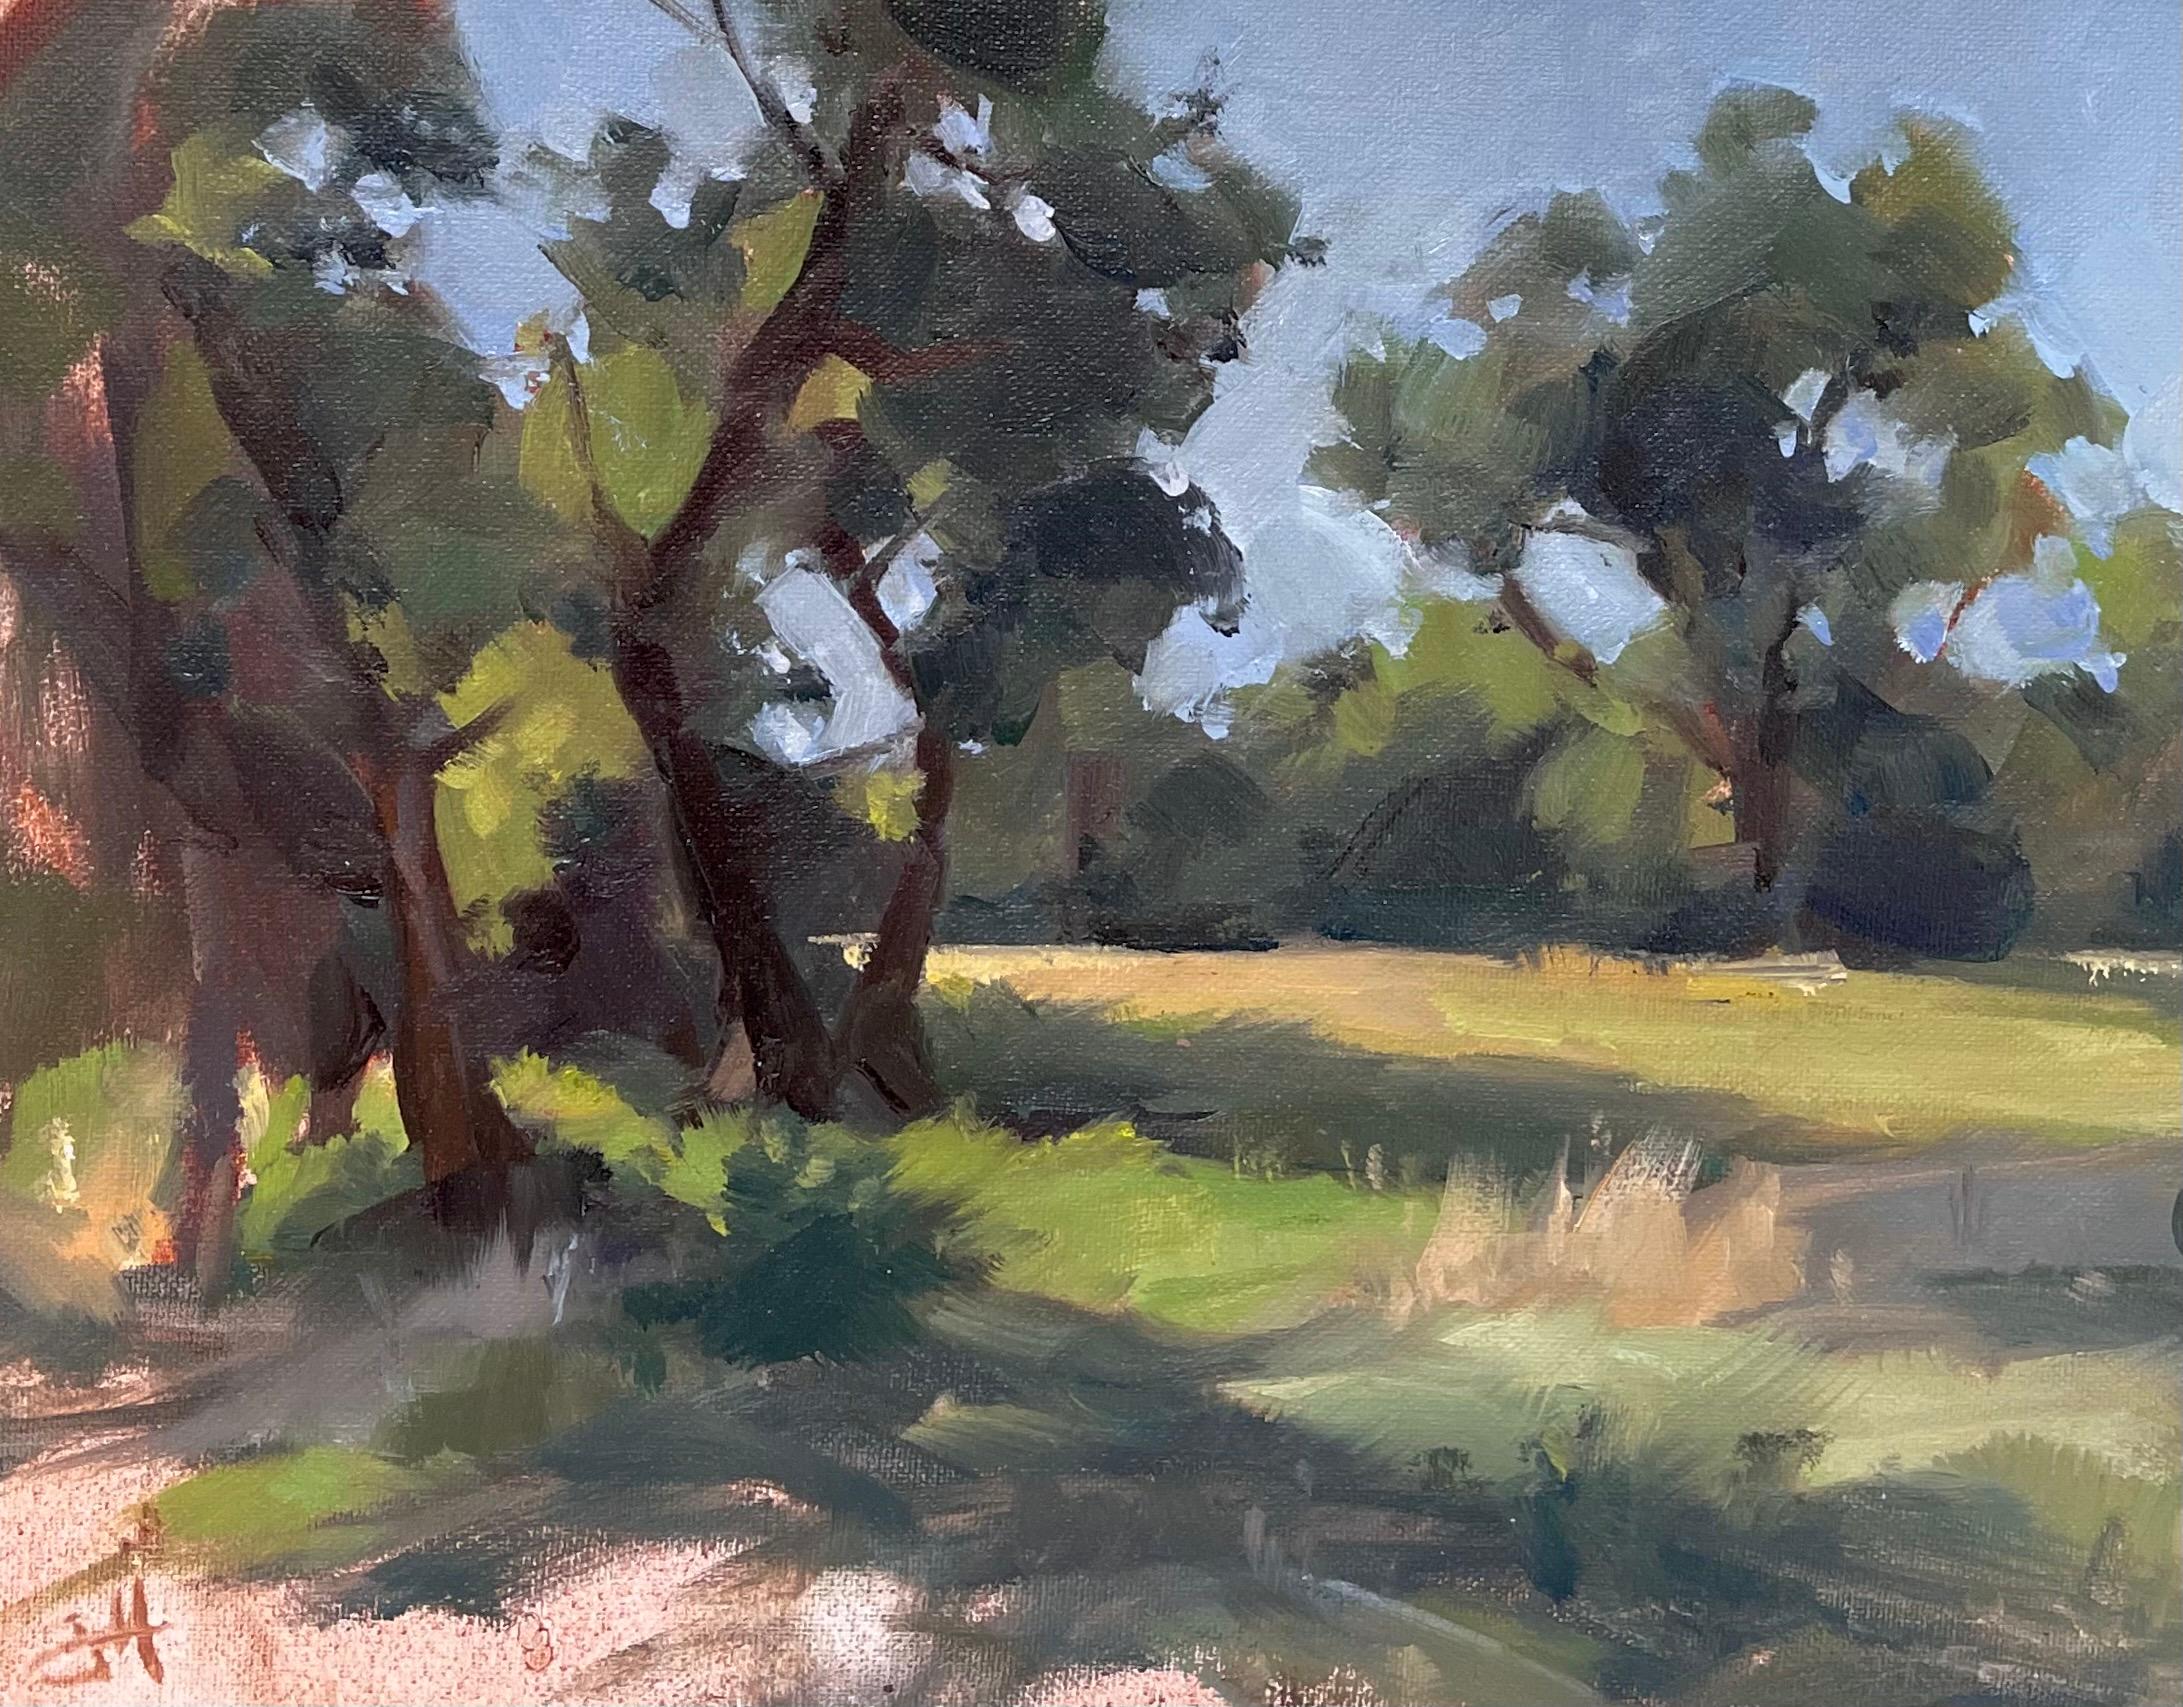 Judd Mercer Landscape Painting - "In the Shade, " Oil painting